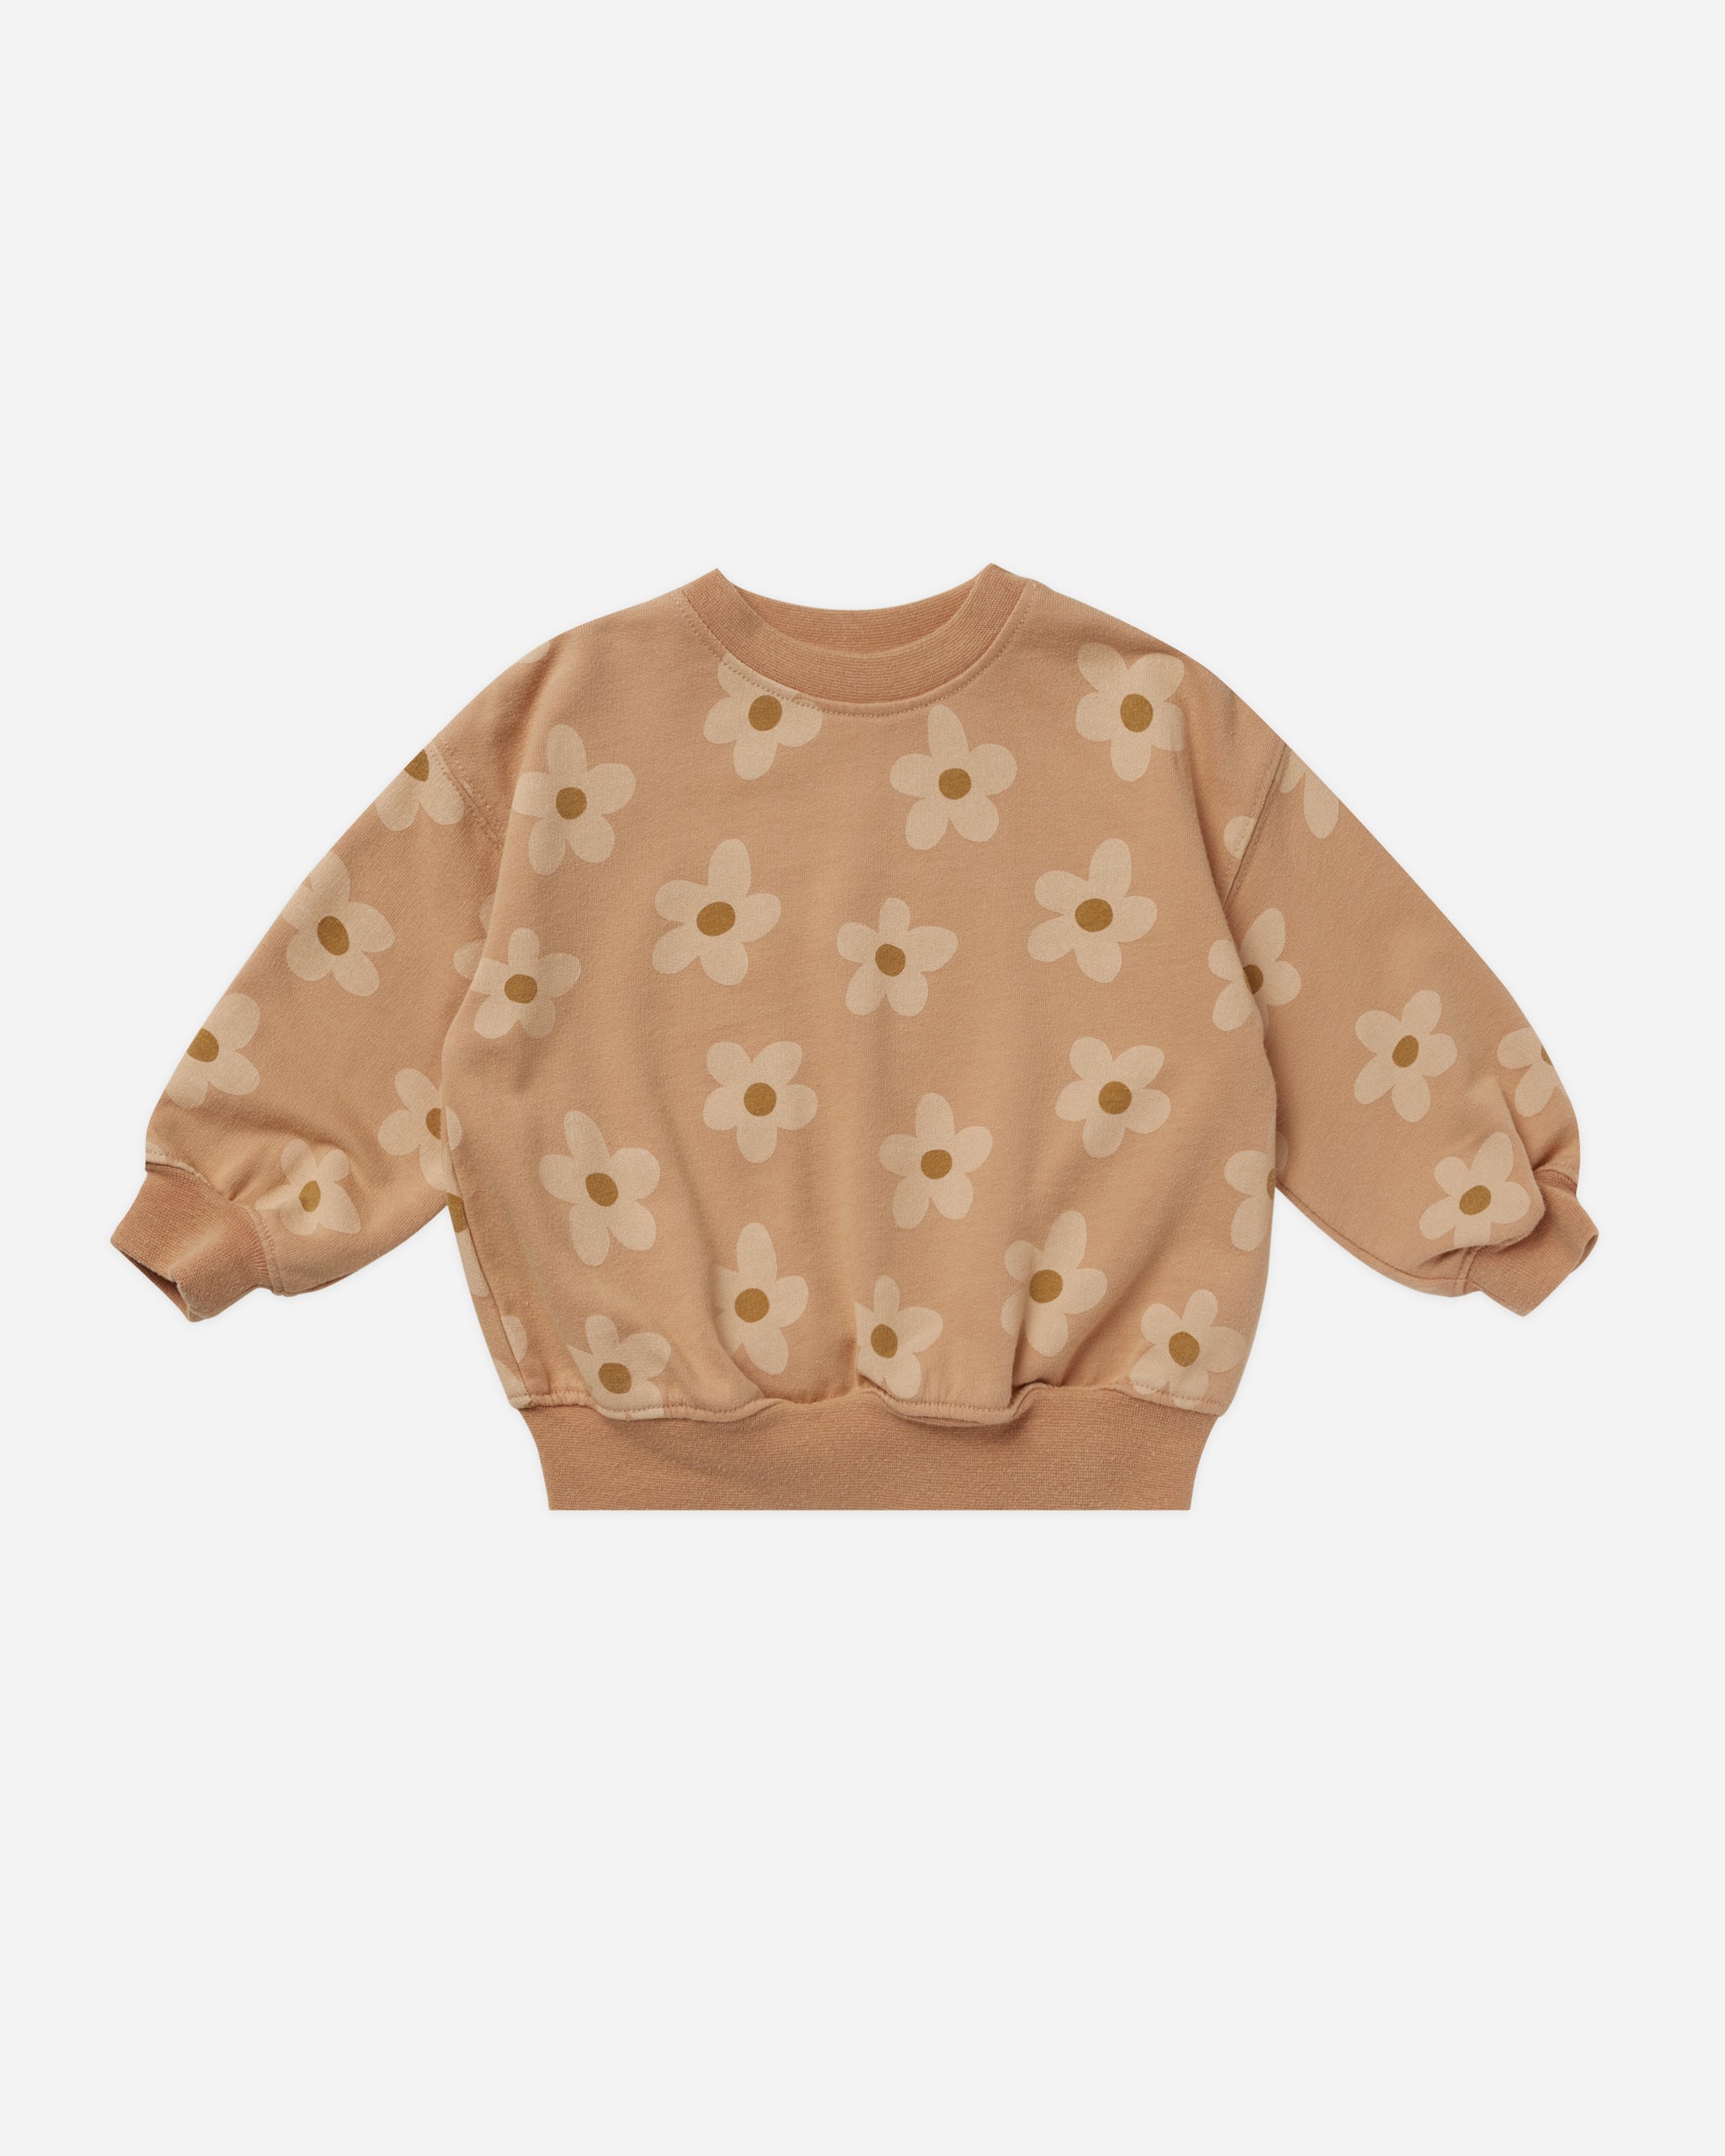 Relaxed Sweatshirt || Melon Daisy - Rylee + Cru | Kids Clothes | Trendy Baby Clothes | Modern Infant Outfits |